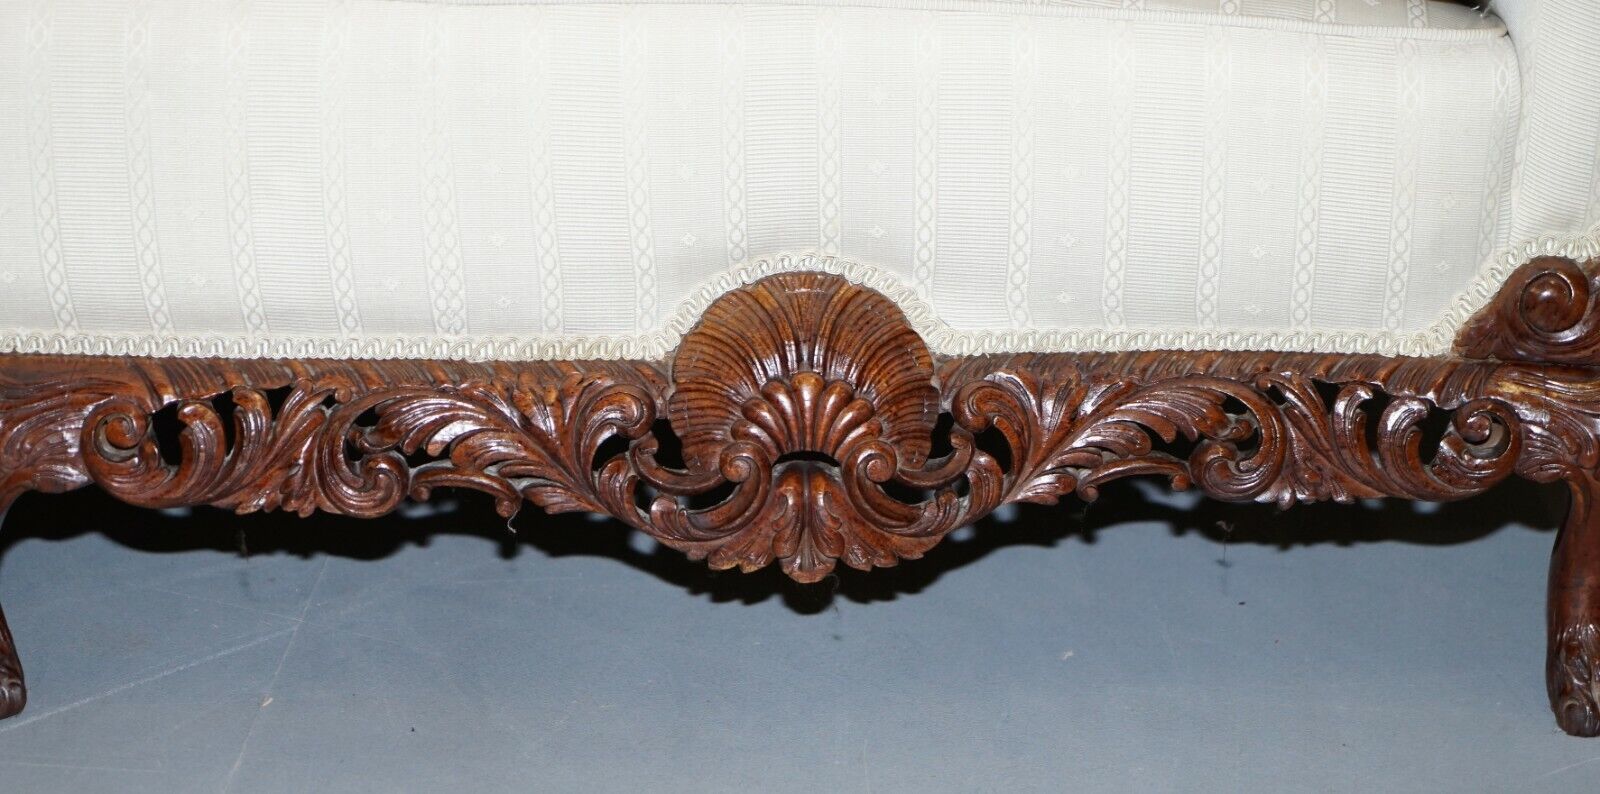 https://royalhouseantiques.co.uk/wp-content/uploads/imported/2/PART-OF-LARGE-SUITE-ORNATELY-CARVED-WALNUT-LION-HAIRY-PAW-FEET-THREE-PERSON-SOFA-175767590552-8.jpg